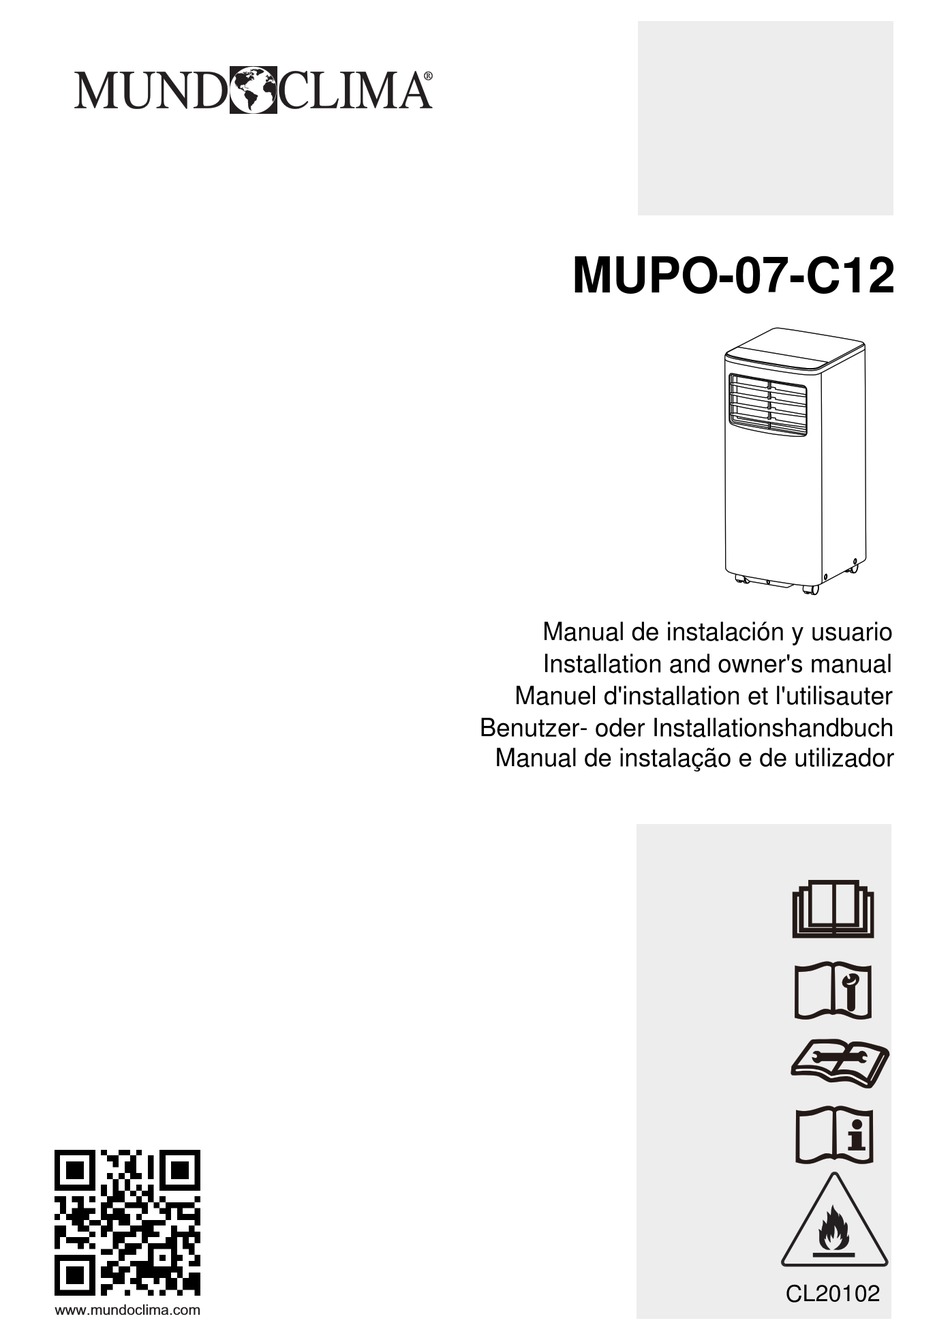 MUNDOCLIMA MUPO-07-C12 INSTALLATION AND OWNER'S MANUAL Pdf Download ...